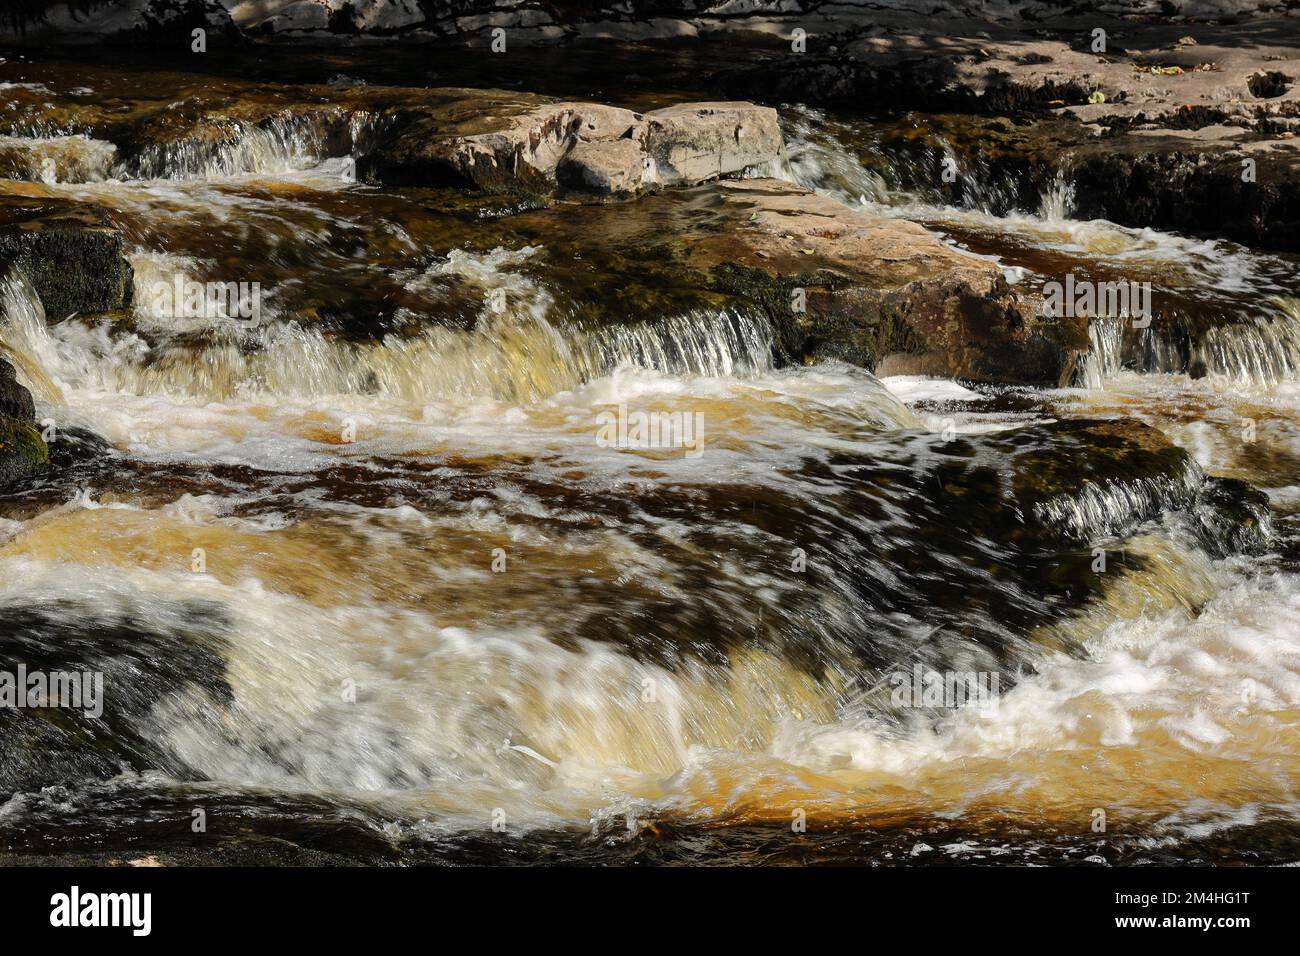 Yorkshire Dales, North Yorkshire, England, UK - Stainforth Force waterfall Stock Photo